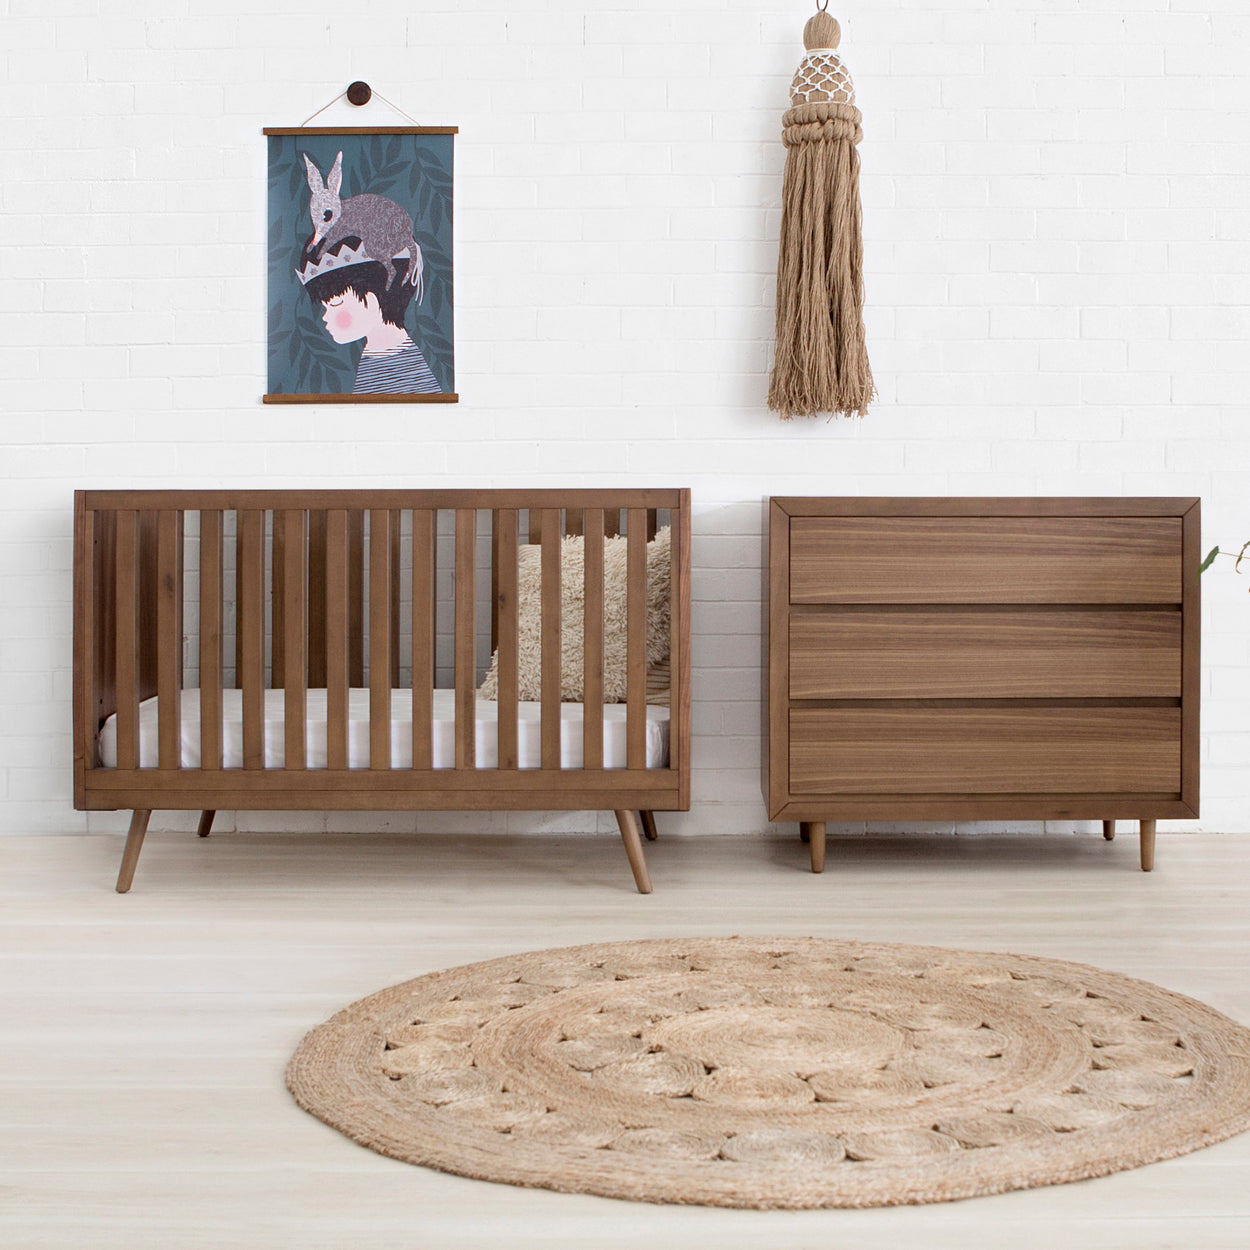 Nifty Timber Cot in Walnut